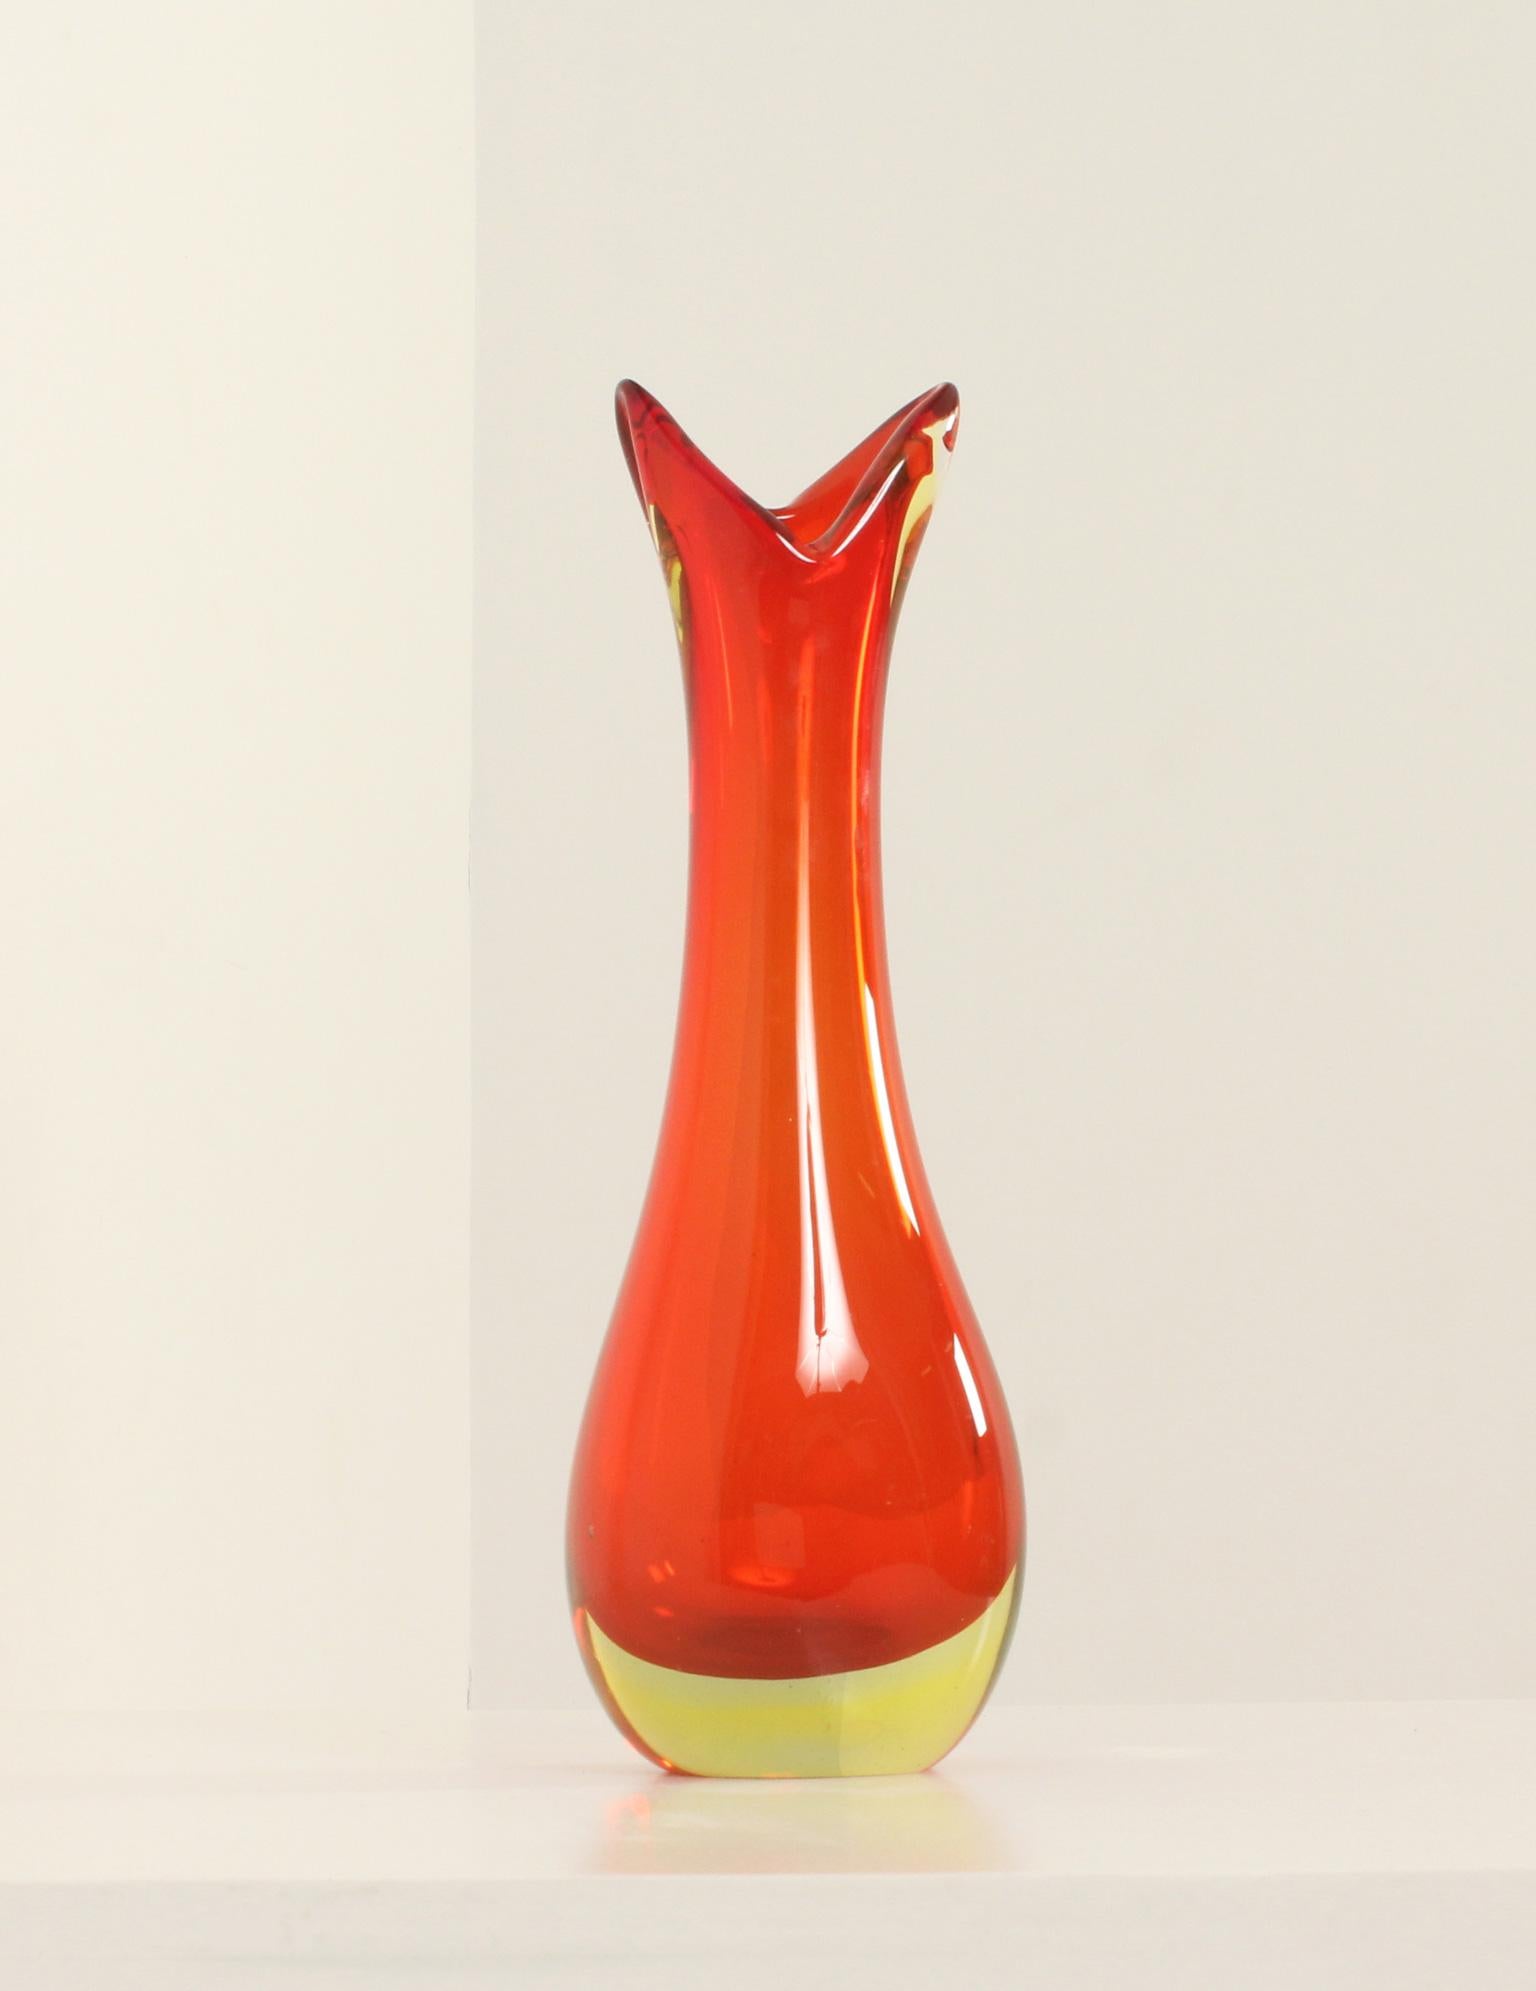 Large Murano glass vase with wide neck from 1960's, Italy. Hand blown Sommerso glass in red and iridescent green color.